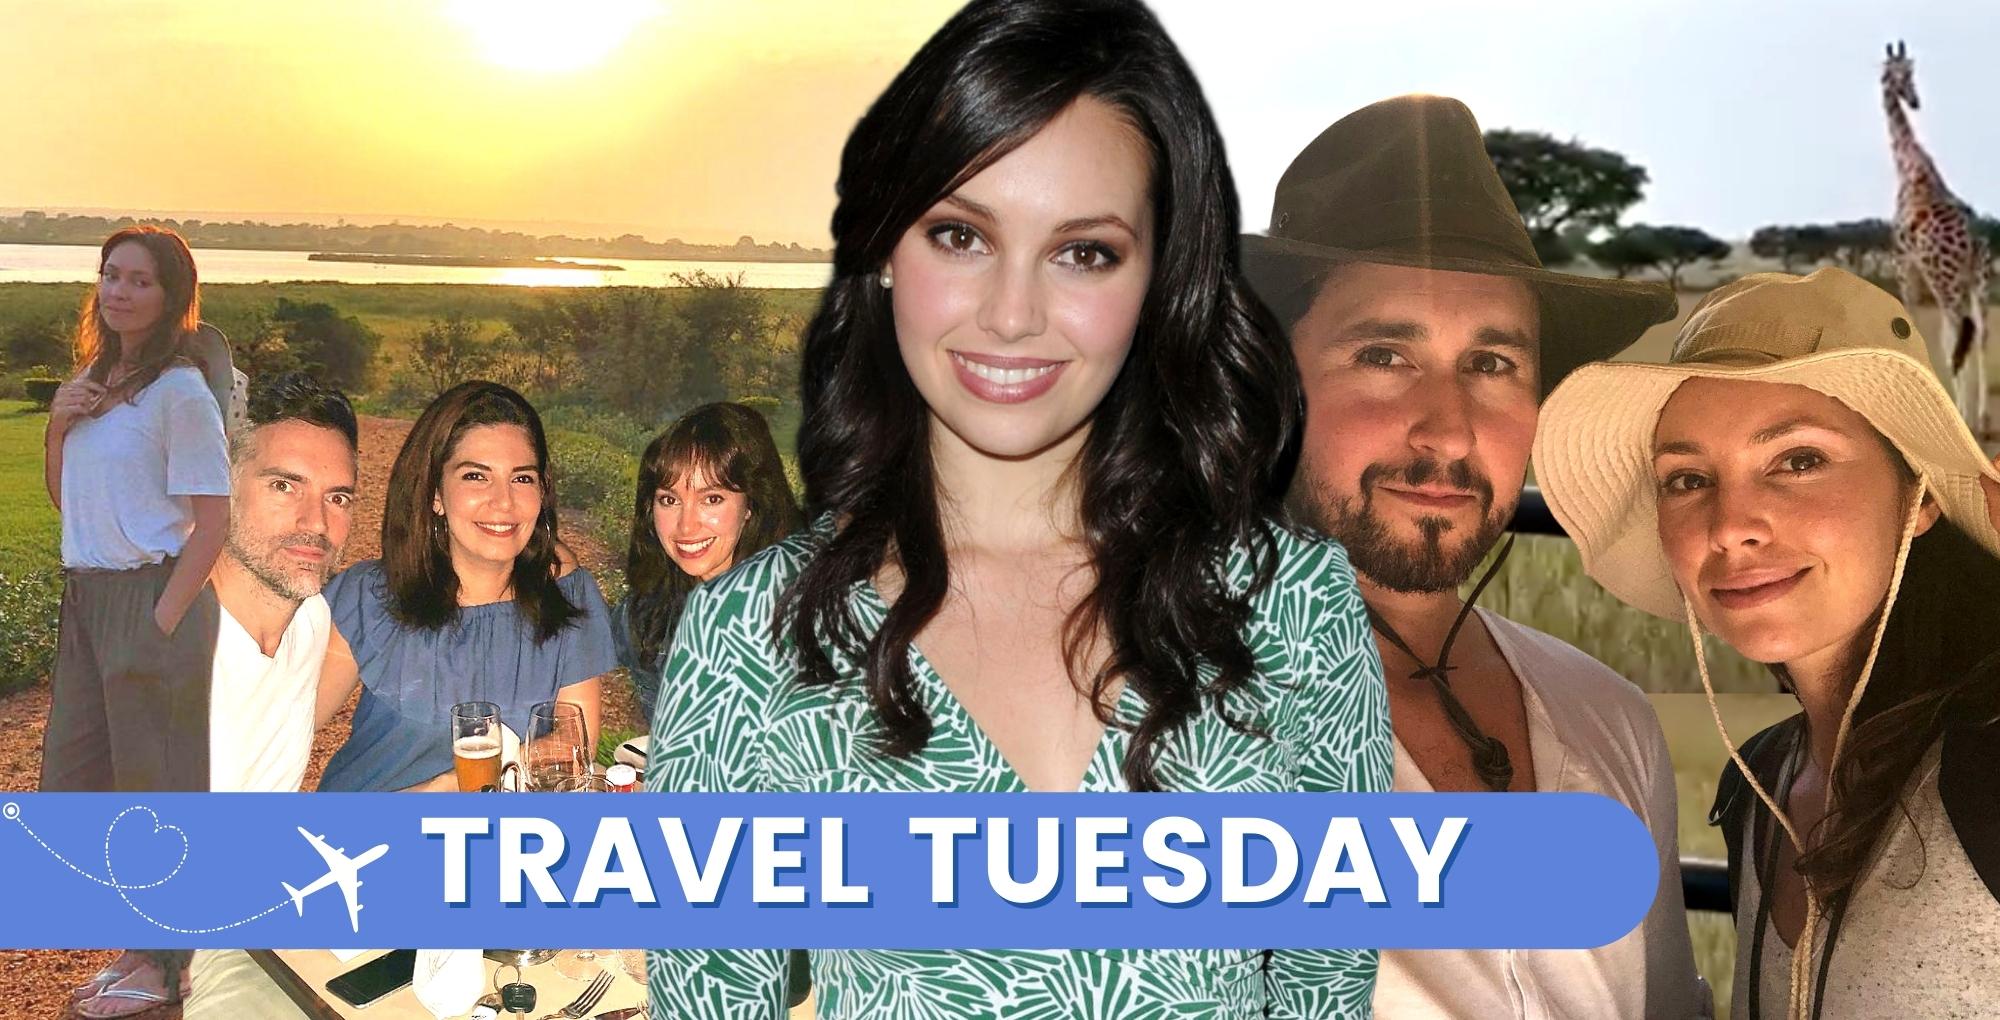 emily o'brien days of our lives star goes to africa and wales travel tuesday